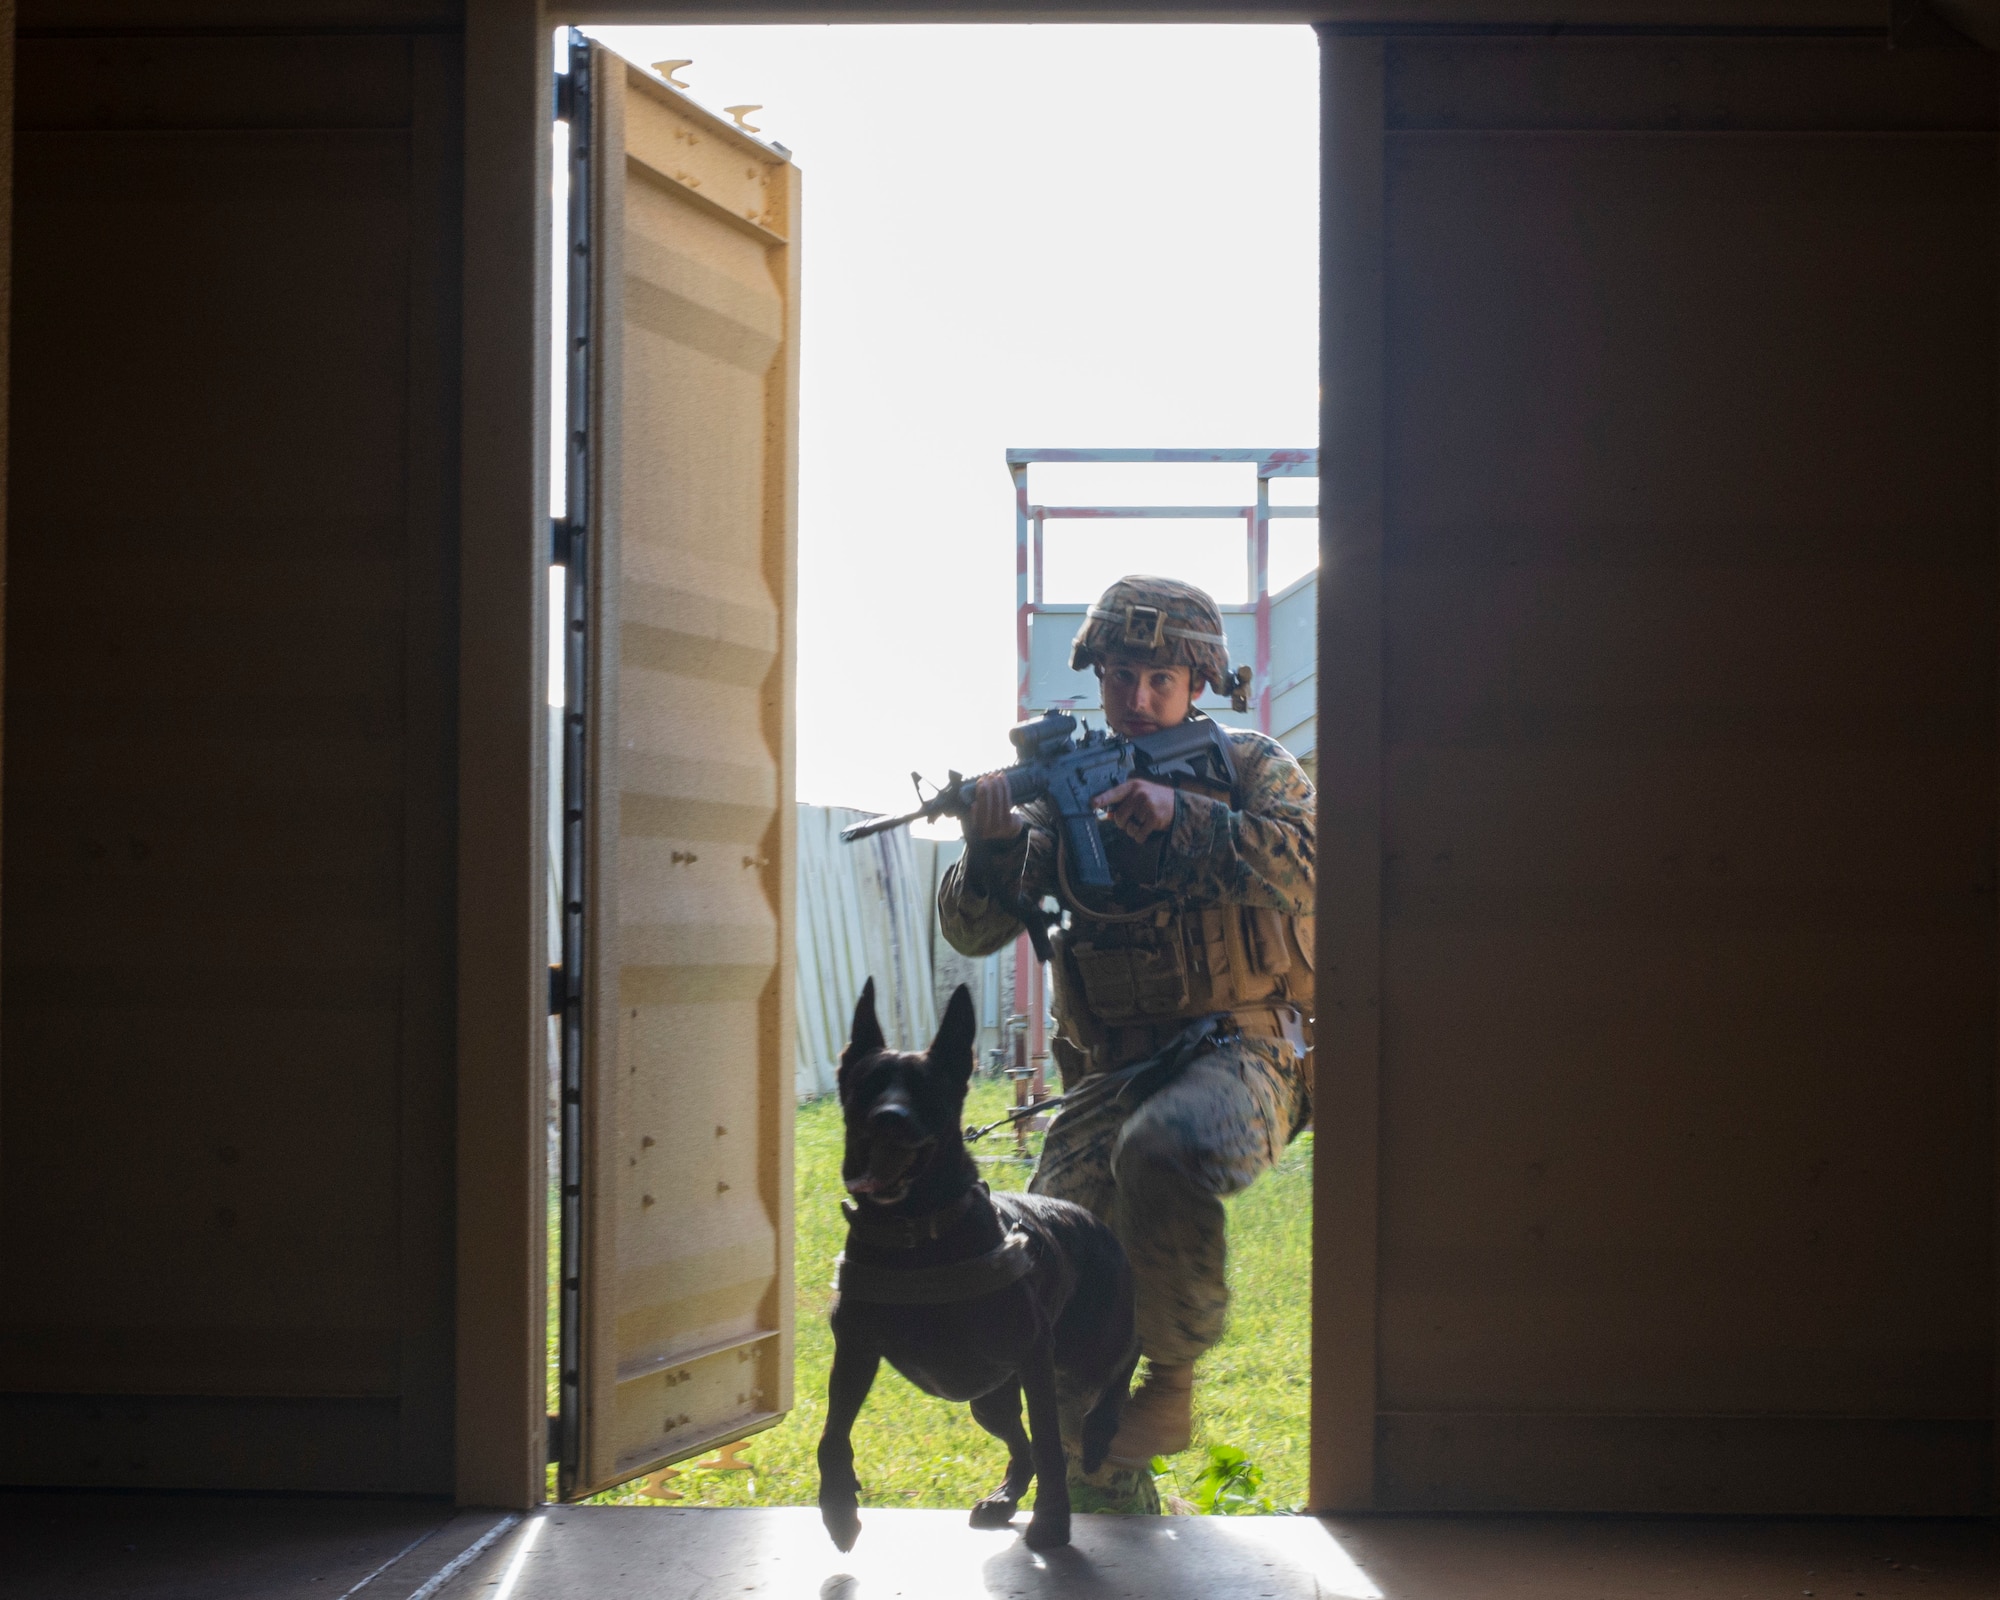 Sgt. Chase McConnell, 3rd Law Enforcement Battallion, and Duece clear out hostiles in an urban training environment on Andersen Air Force Base, Guam Nov. 20. Marines and Airmen exchanged MWD techiques to enhance joint mission effectivness. (U.S. Air Force photo by Staff Sgt. Nicholas Crisp)